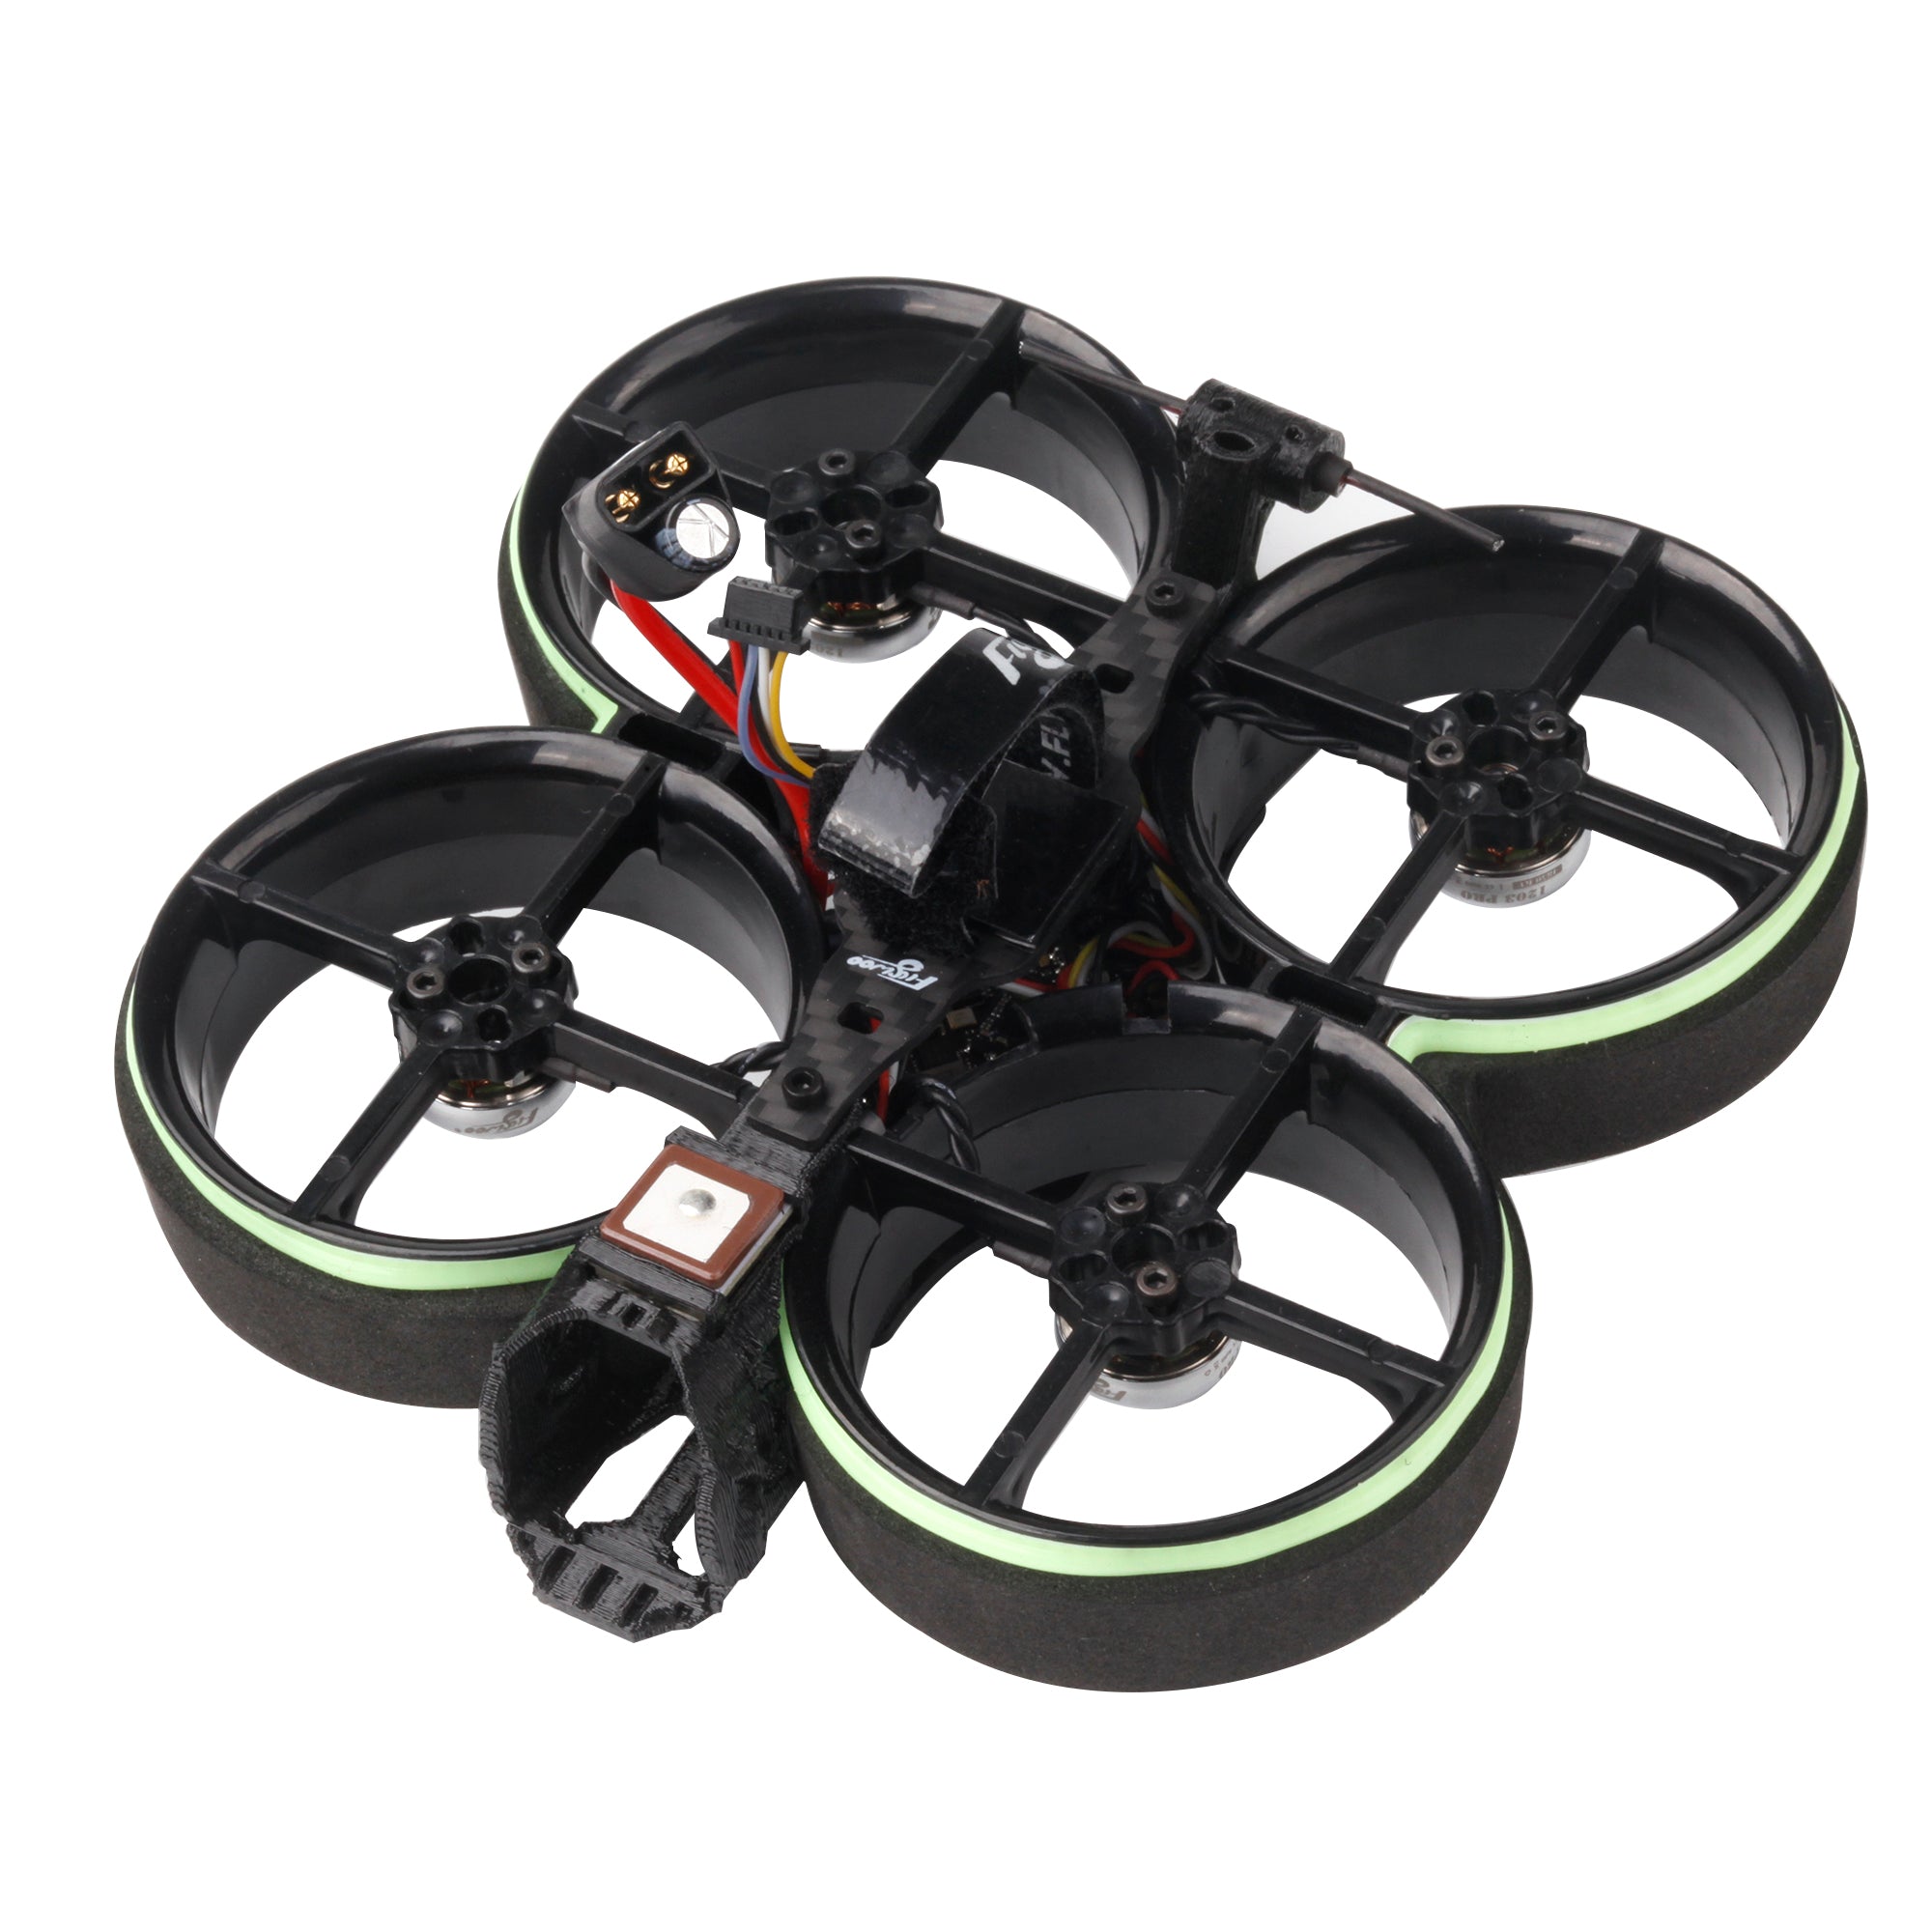 CineRace20 V2 HD DJI O3 2inch cinewhoop (Without O3 Air unit )